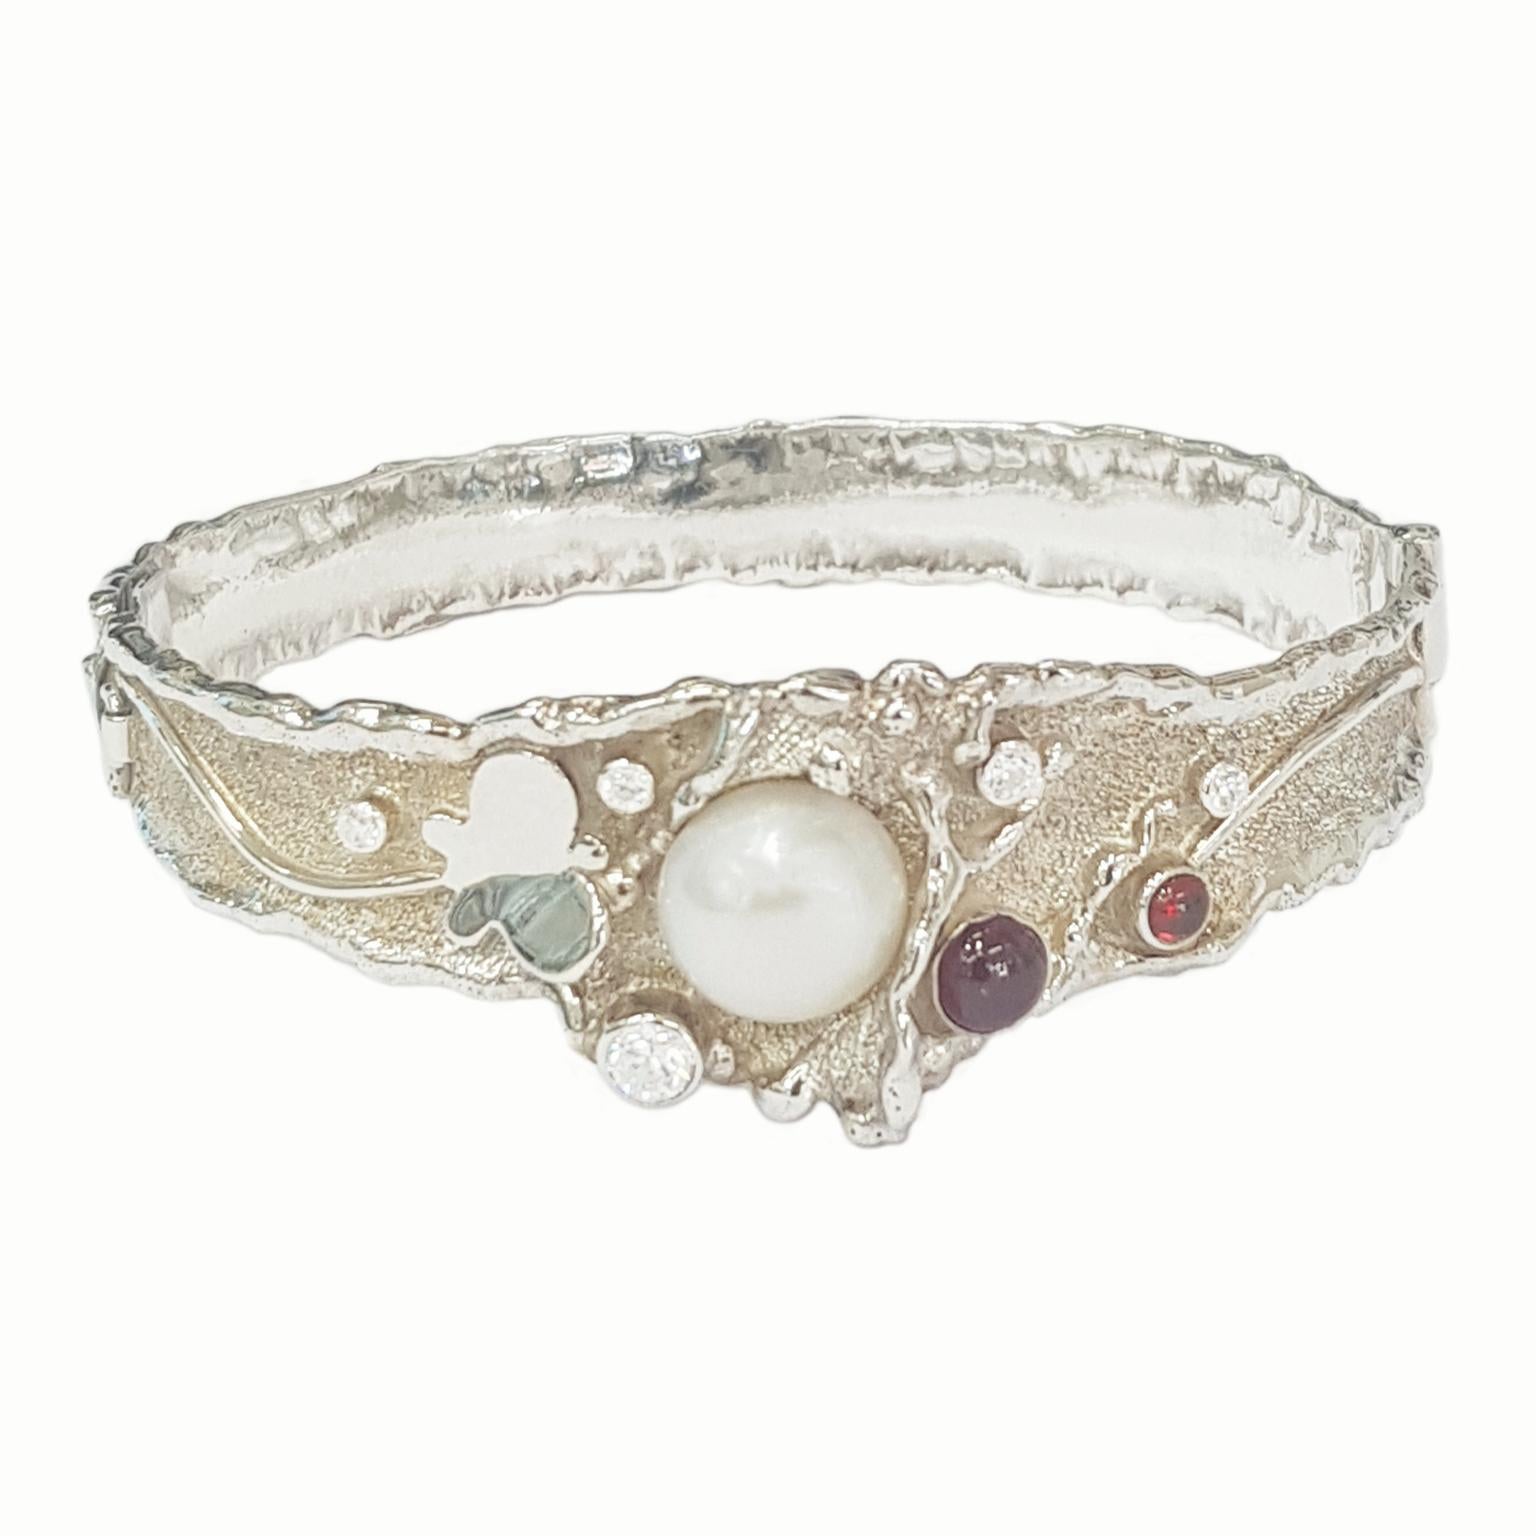 Paul Amey’s signature molten edge bangle is a totally unique and completely handcrafted and created by Paul Amey.  This garnet and pearl bangle was crafted from Sterling Silver with the centre width of the bangle approximately 20mm and then tapering